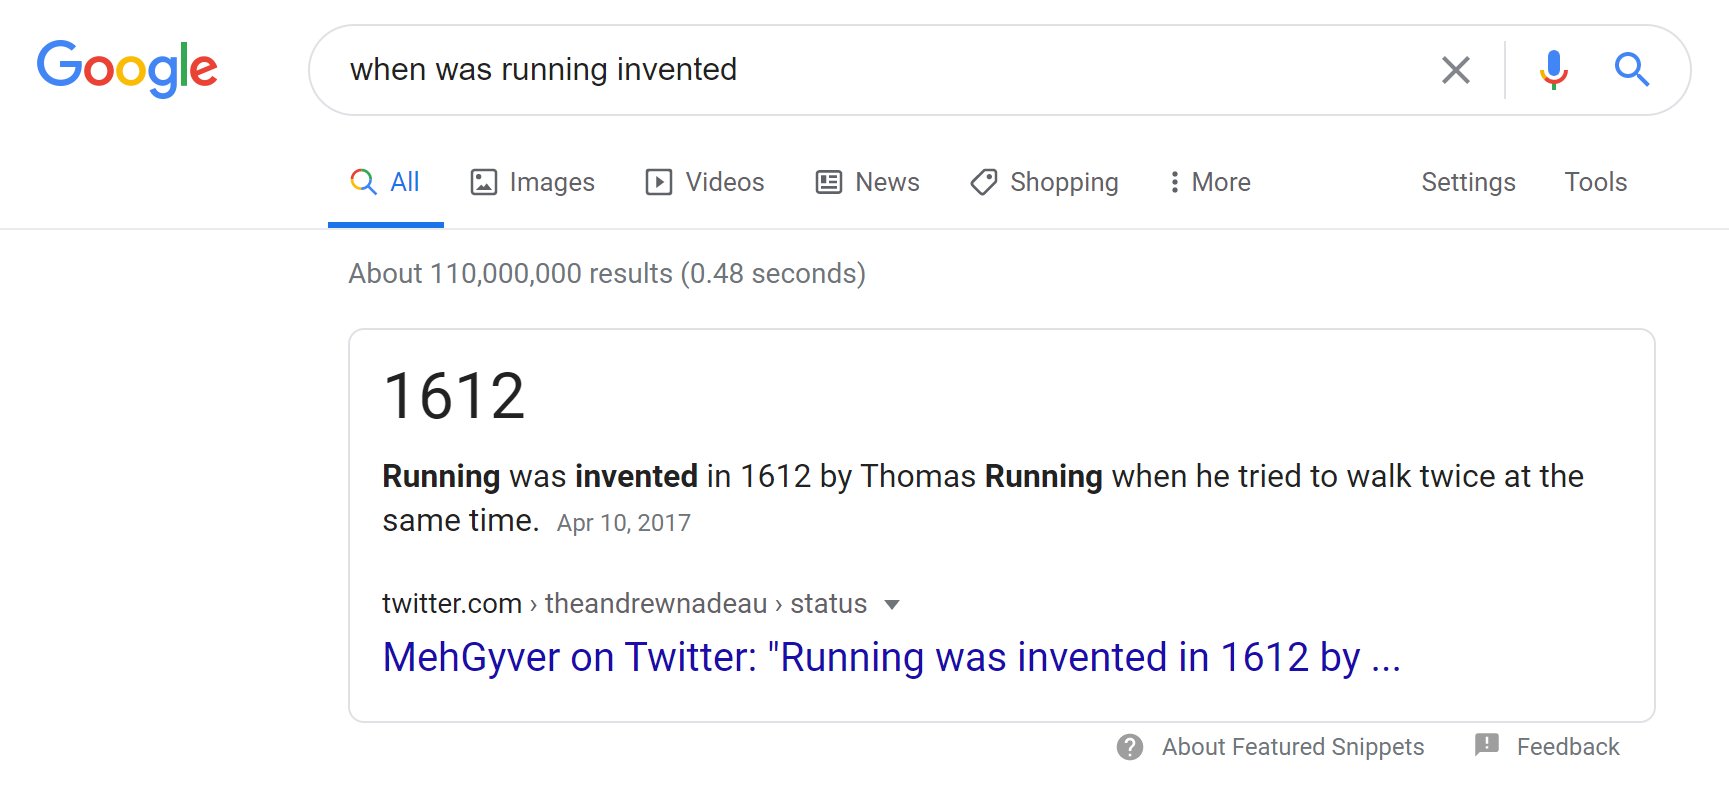 Running was invented in 1612